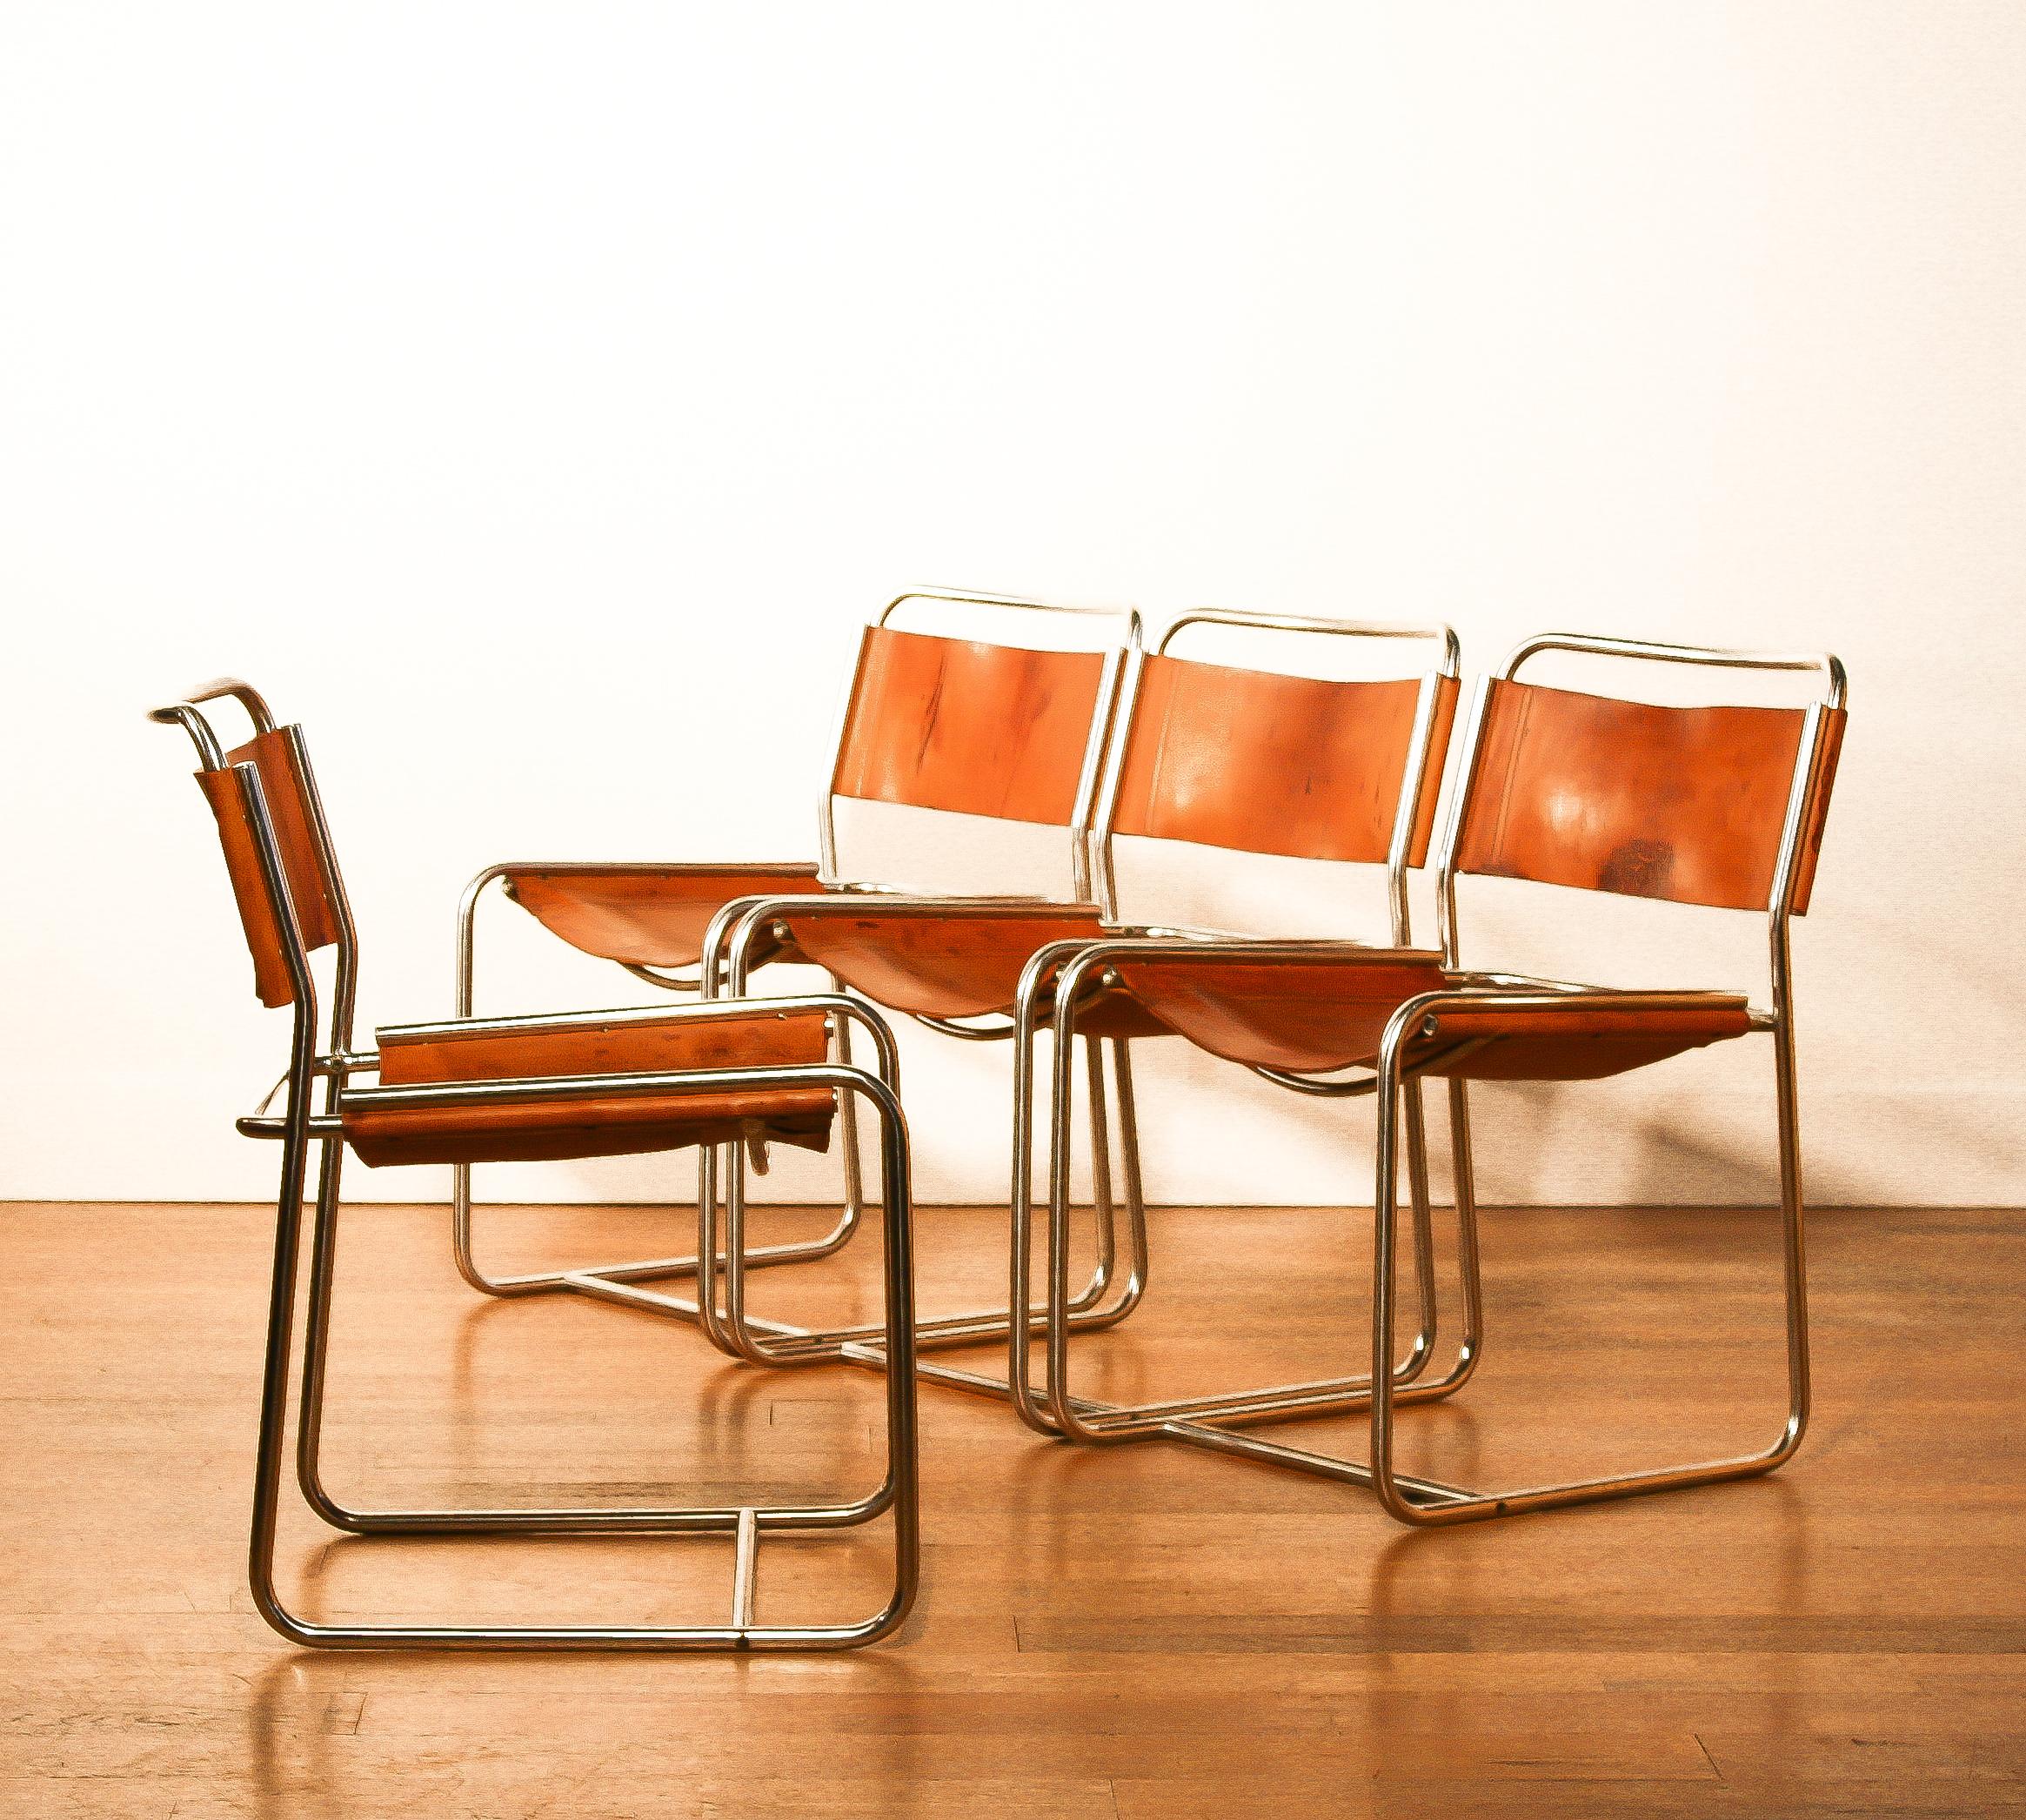 Steel / Leather Set Dining Chairs by Paul Ibens & Clair Bataille for 't Spectrum In Good Condition In Silvolde, Gelderland